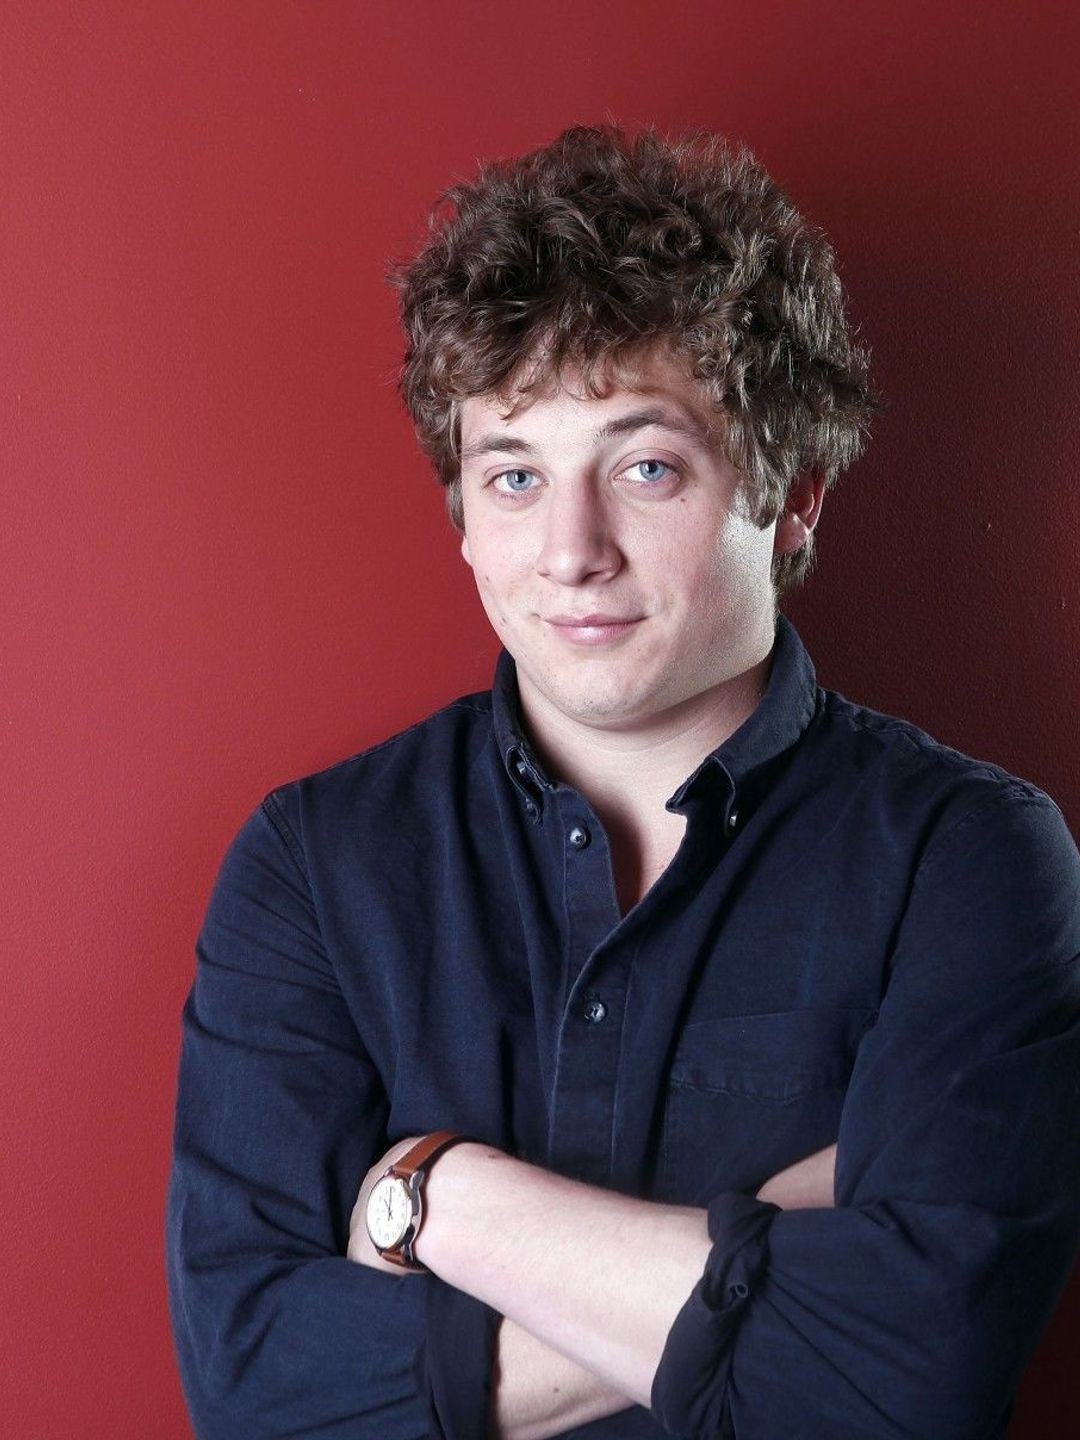 Jeremy Allen White does he have a wife